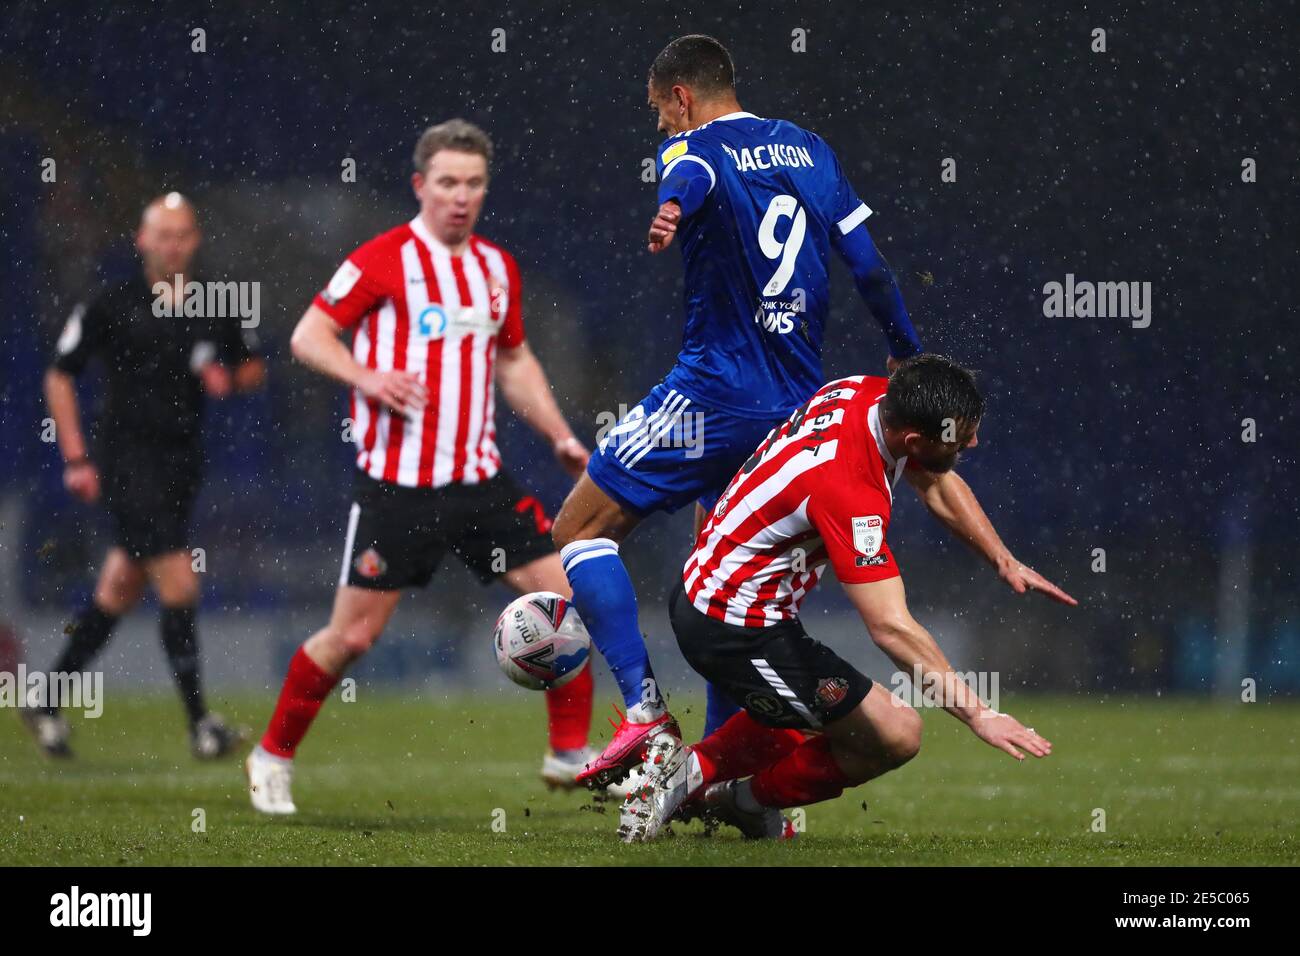 Kayden Jackson of Ipswich Town clashes with Bailey Wright of Sunderland before receiving a red card for violent conduct - Ipswich Town v Sunderland, Sky Bet League One, Portman Road, Ipswich, UK - 26th January 2021  Editorial Use Only - DataCo restrictions apply Stock Photo